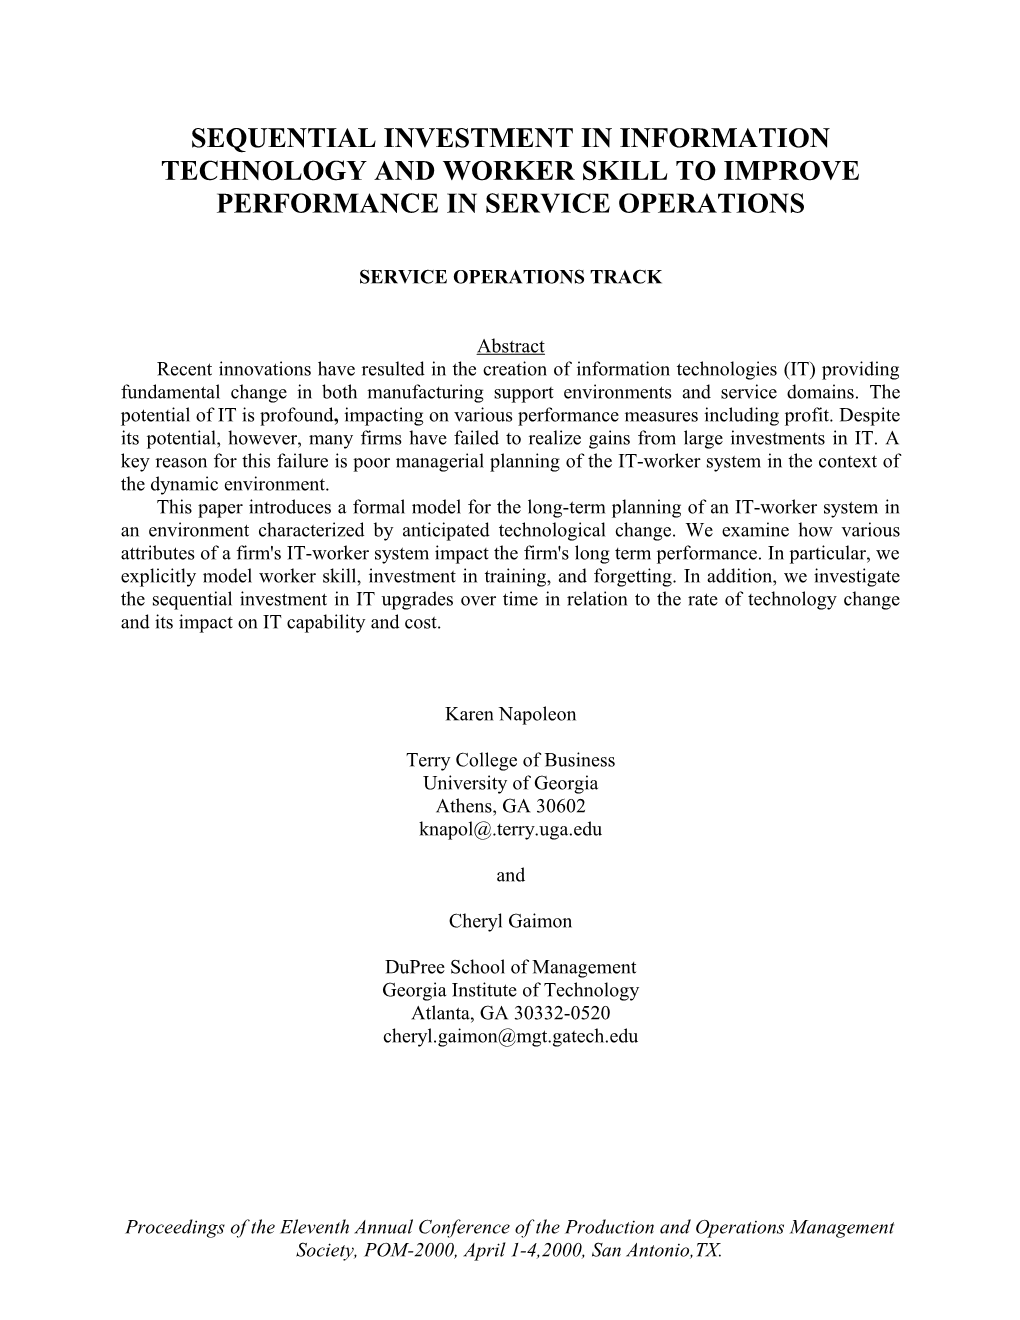 Improved Production Performance in Services Through Dynamic Investment in Information Technology